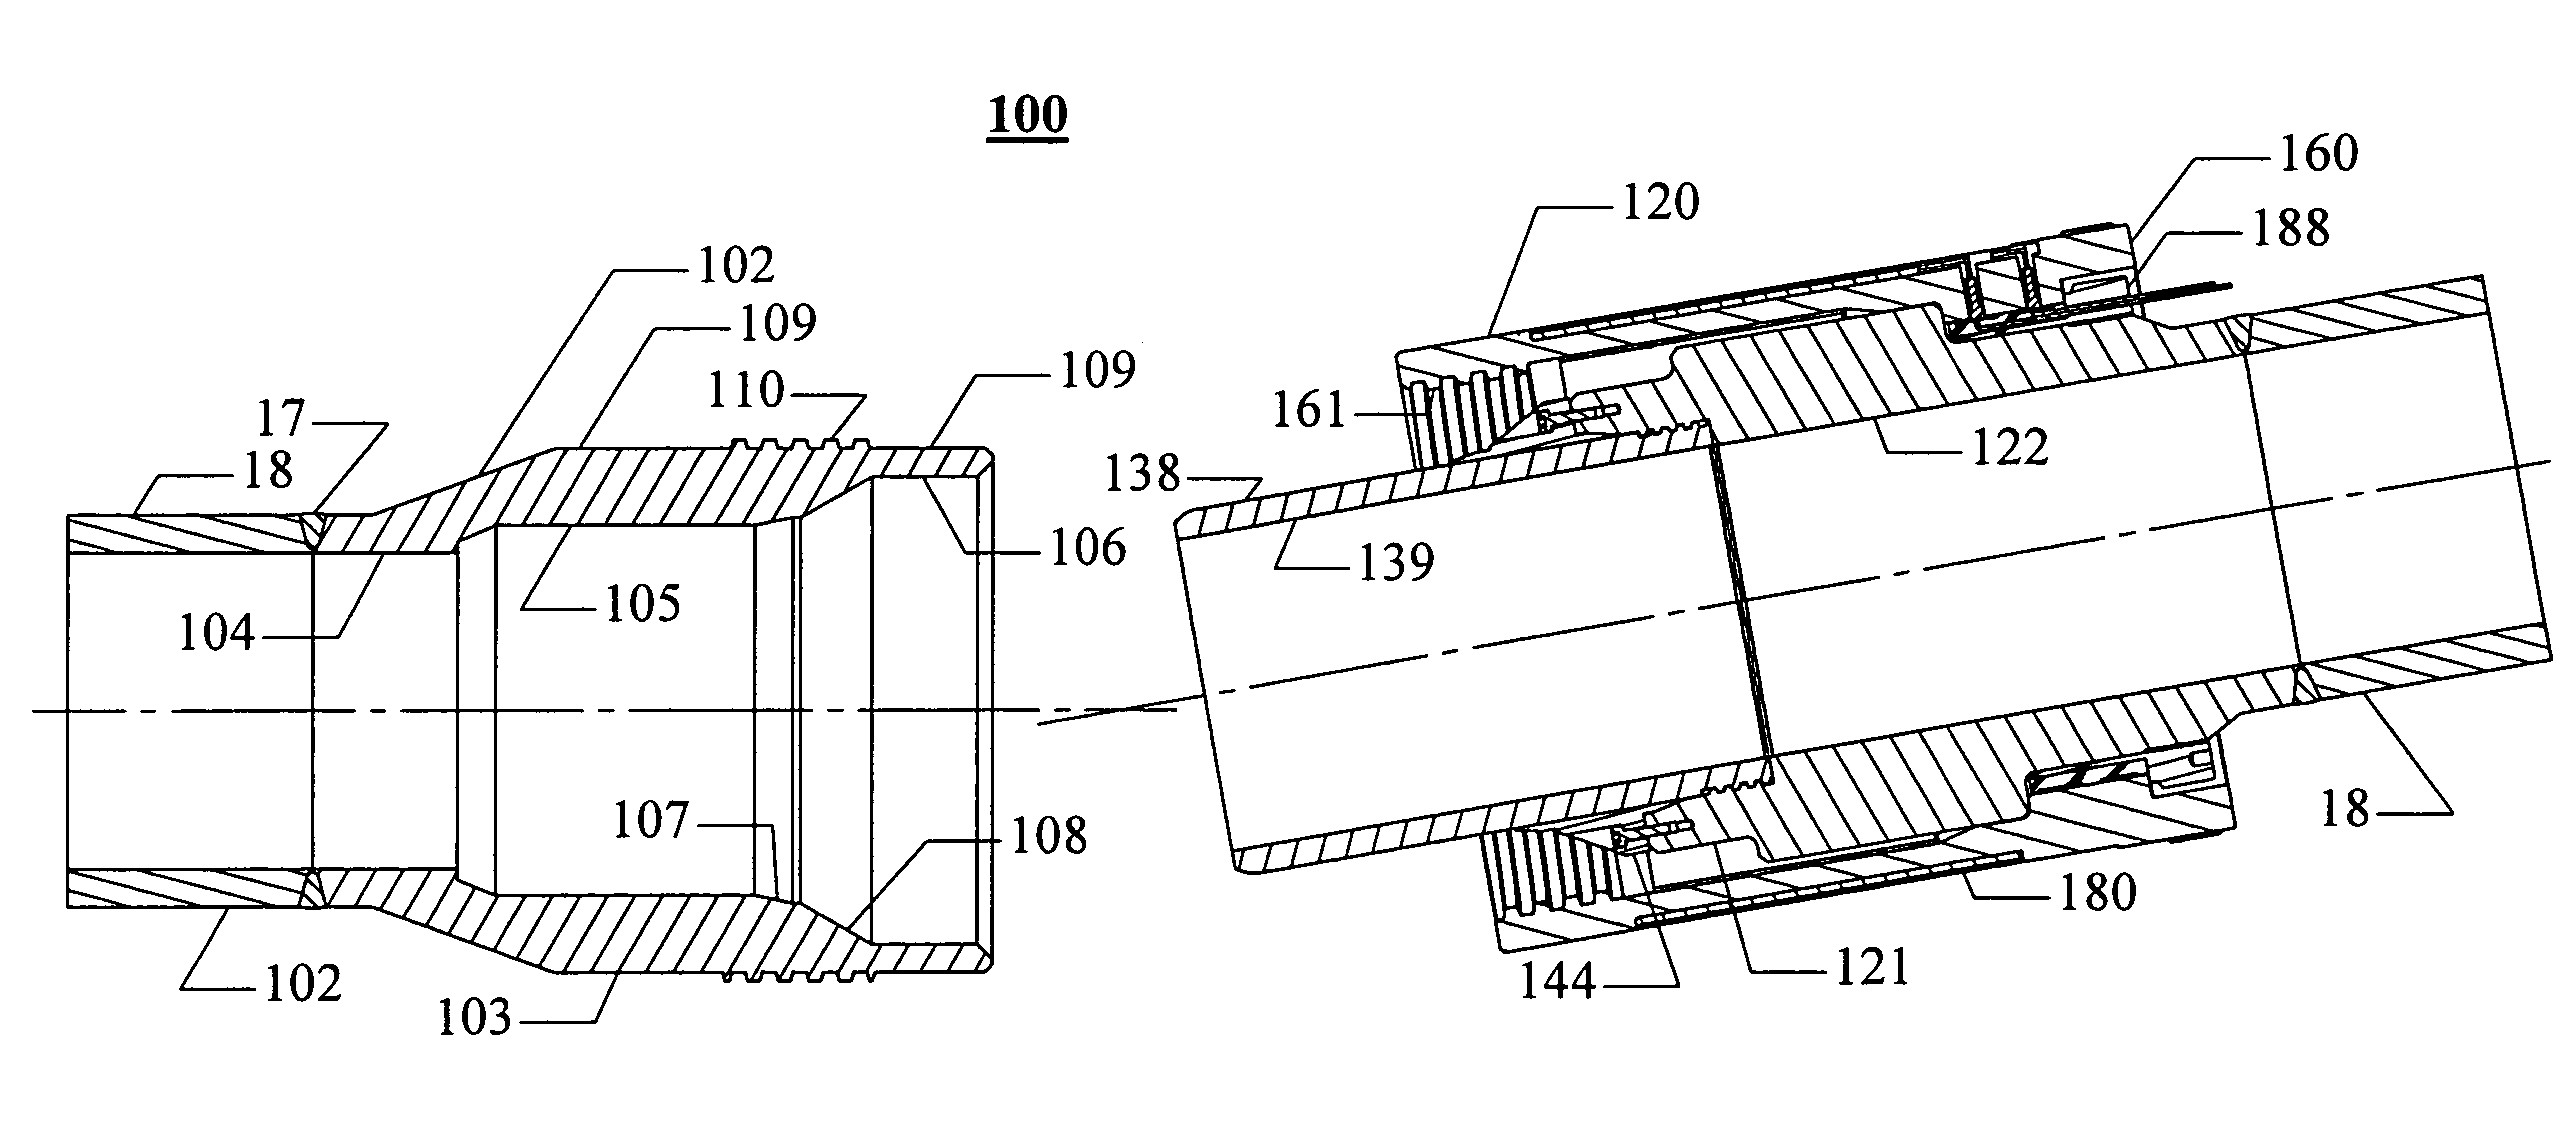 Pressure-containing tubular connections for remote operation